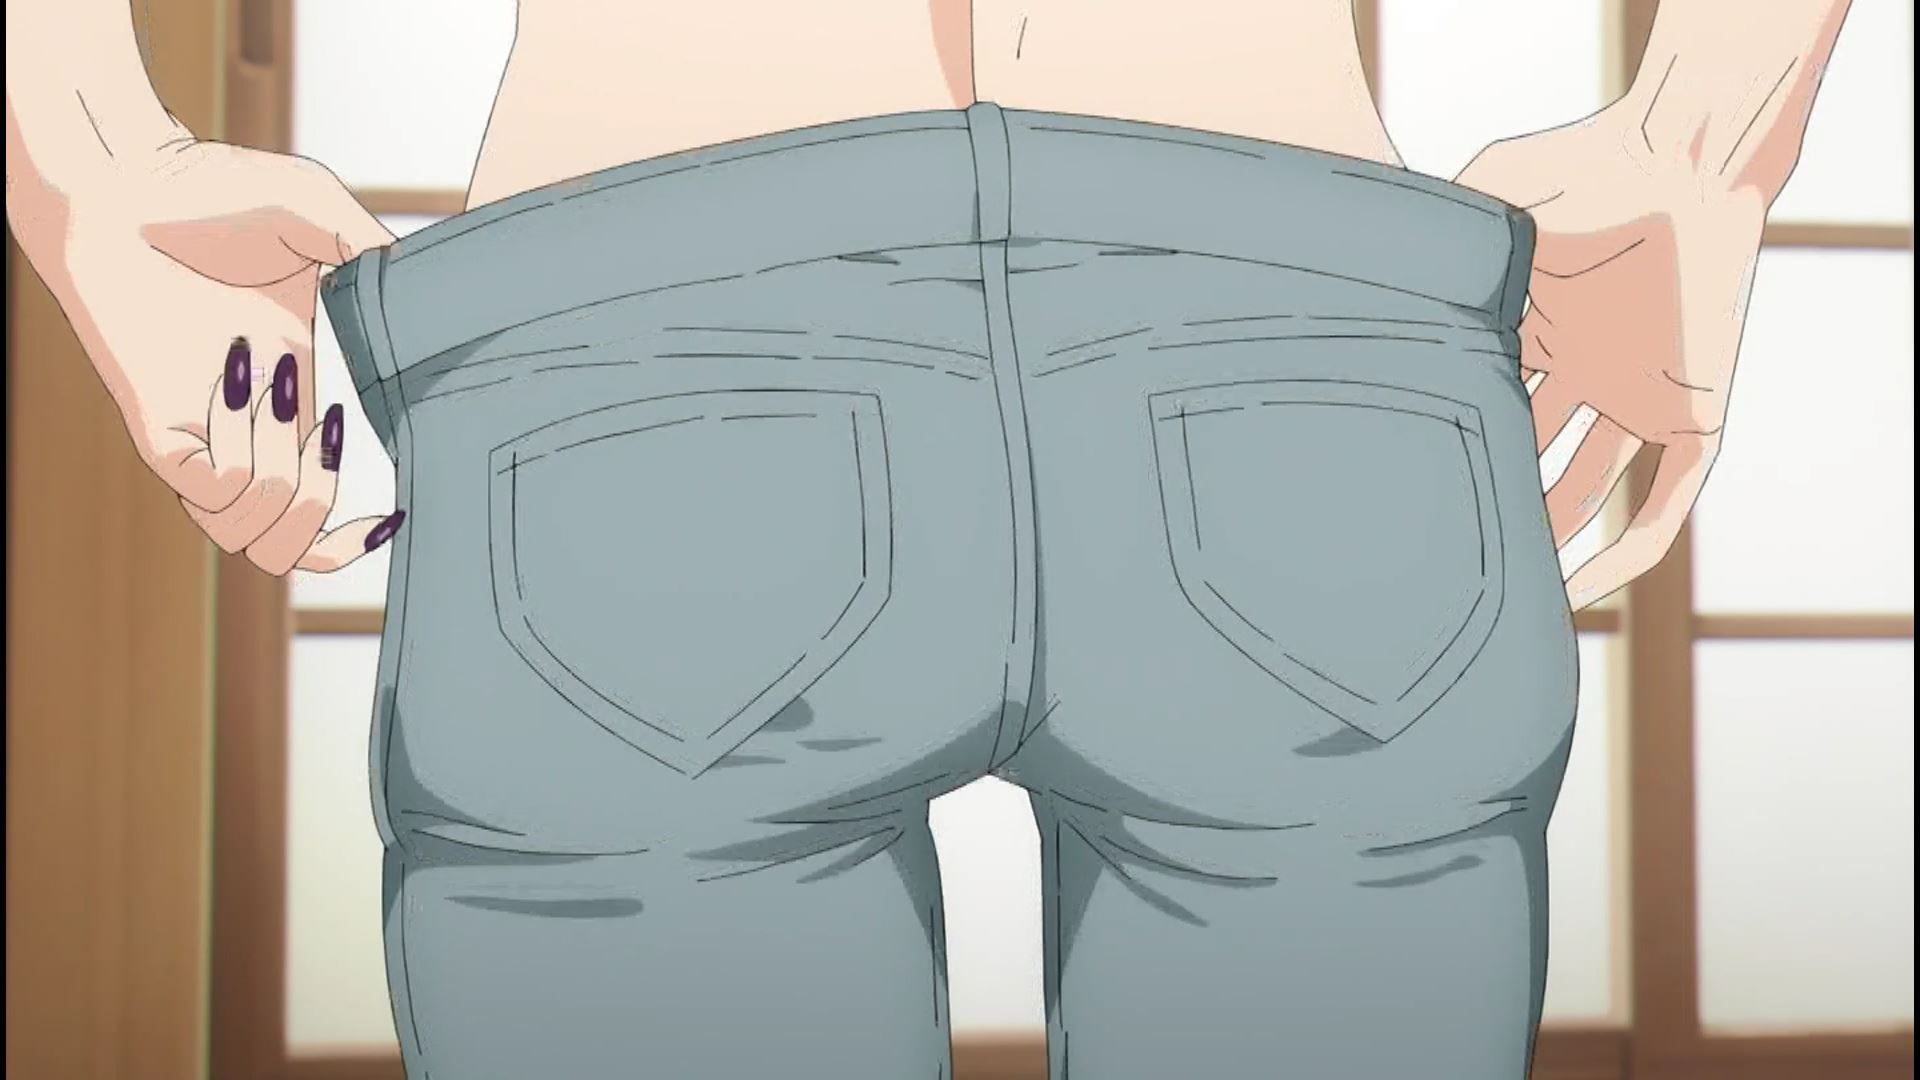 In the changing scene of episode 4 of the anime "That Dress-up Doll Falls in Love", pants and bra are fully visible! 5